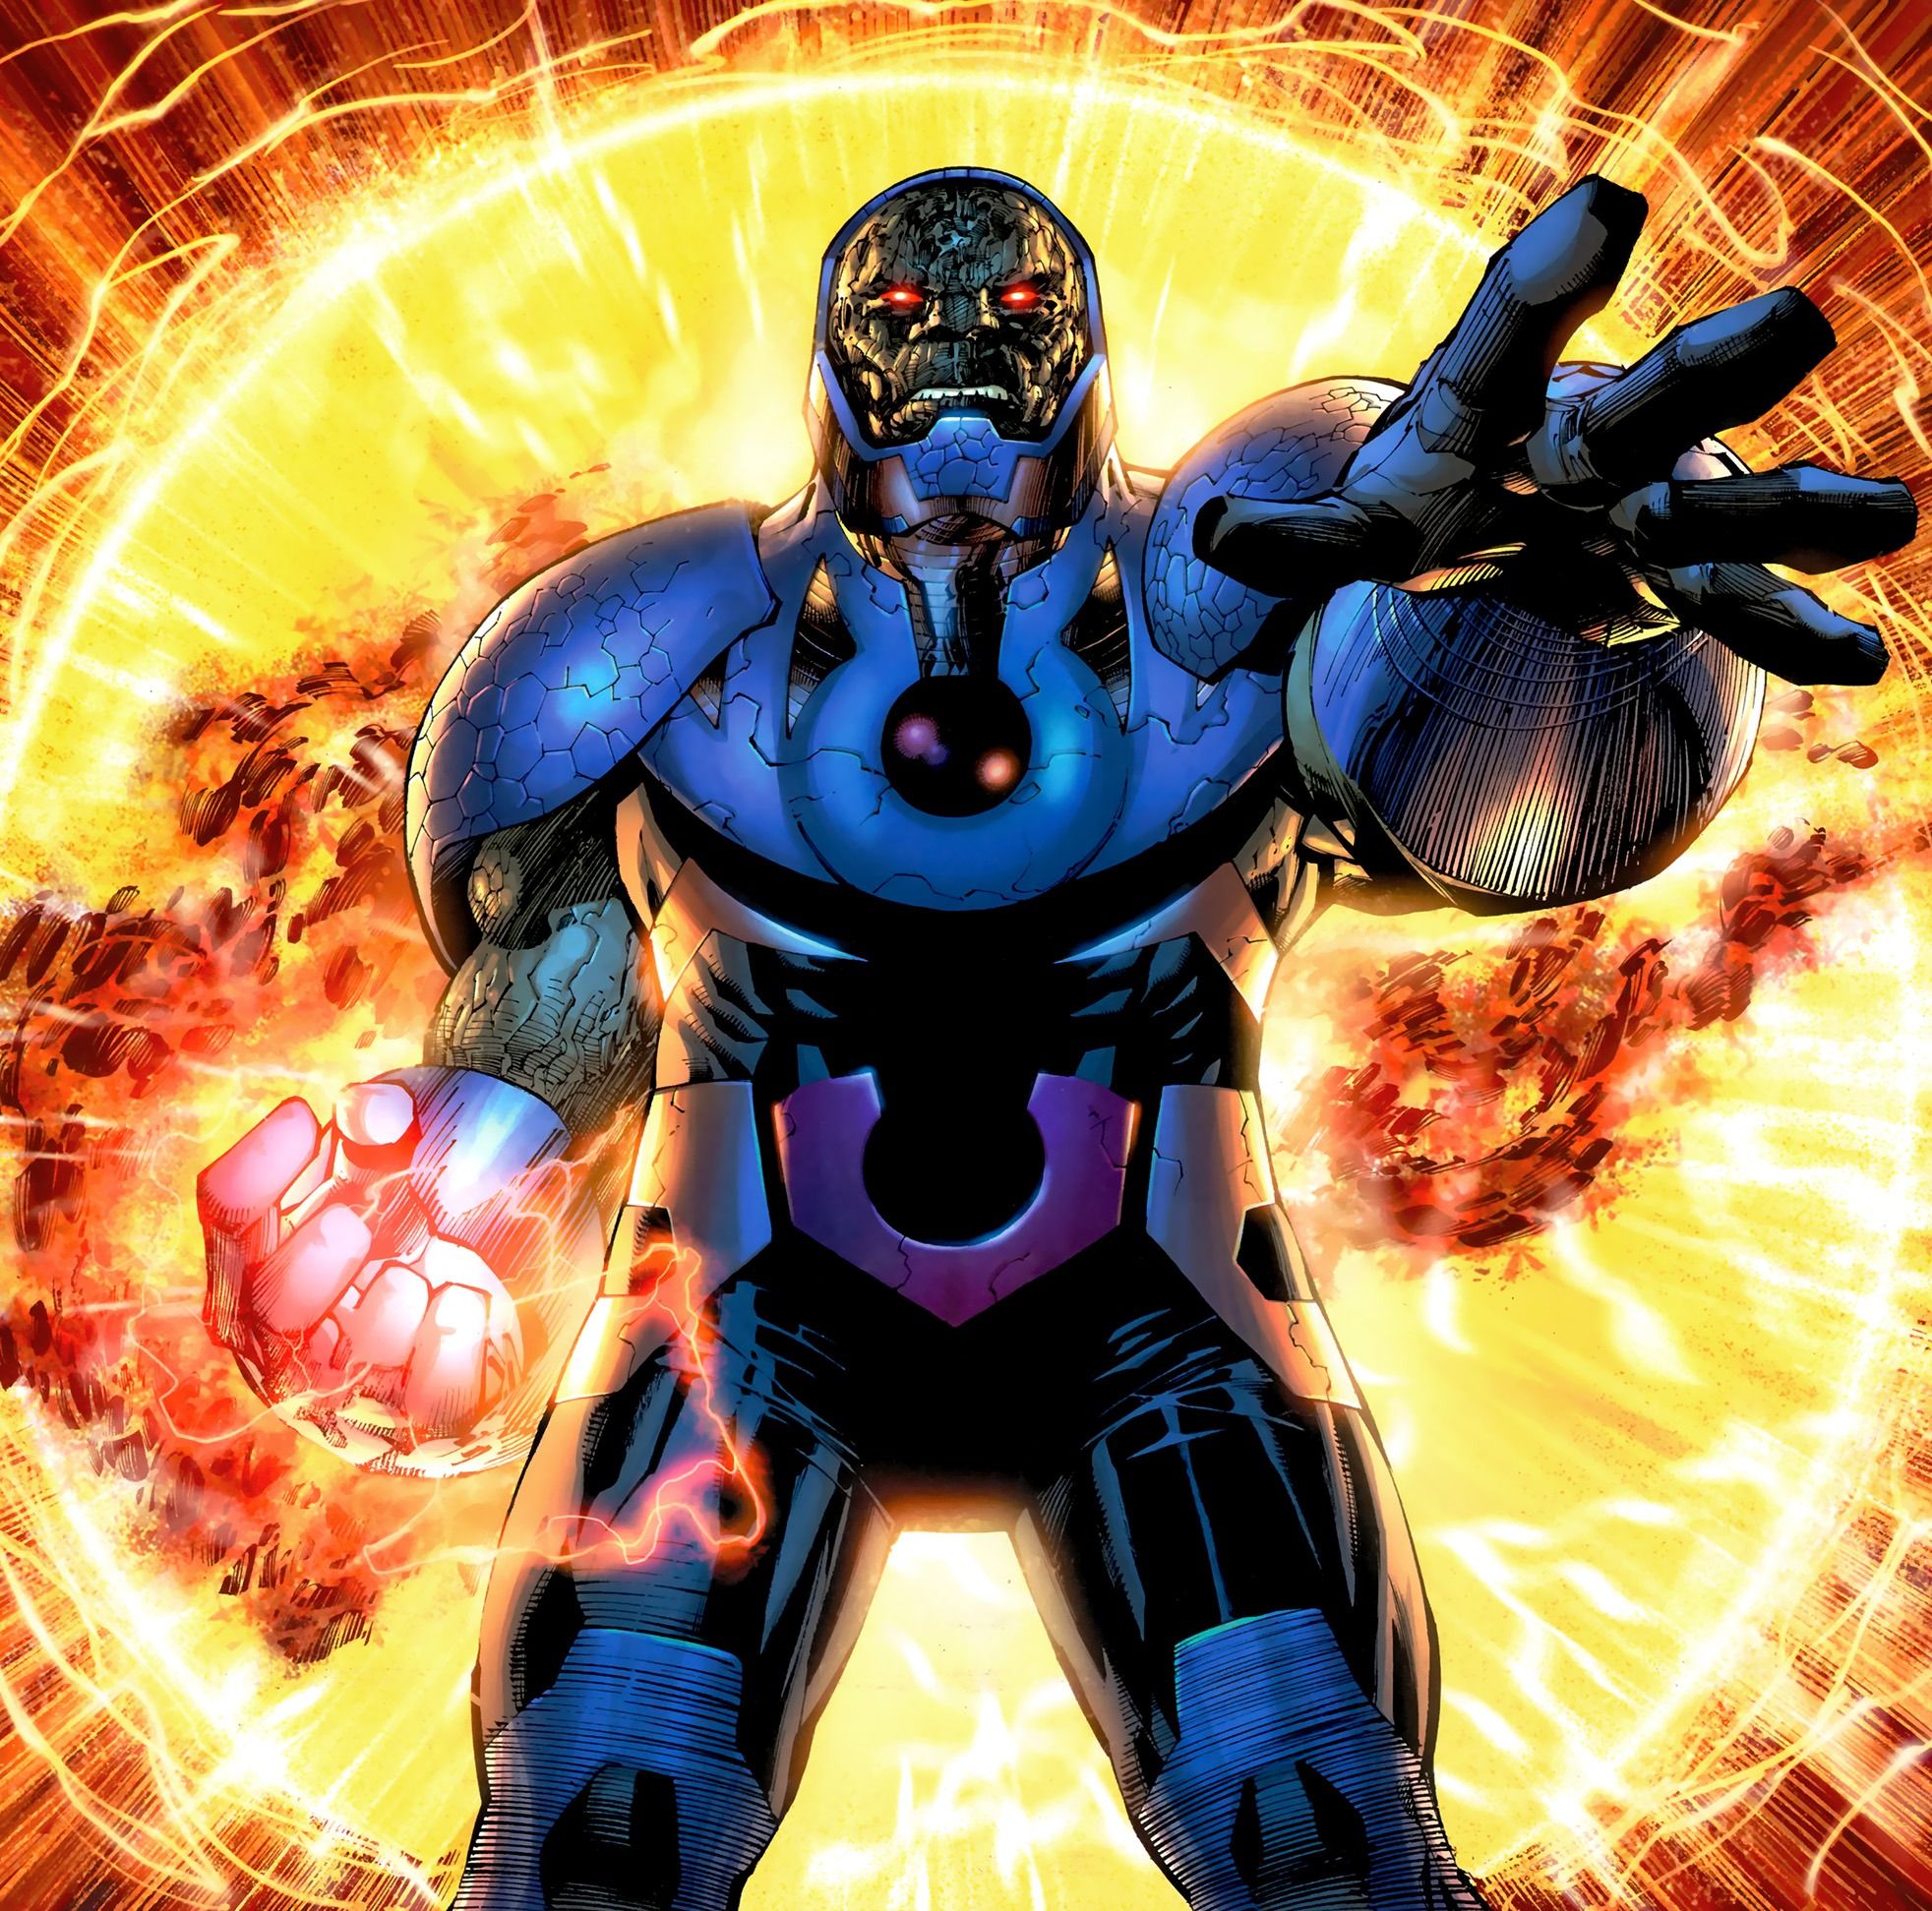 Rumor of the Day: First plot details and Darkseid's role